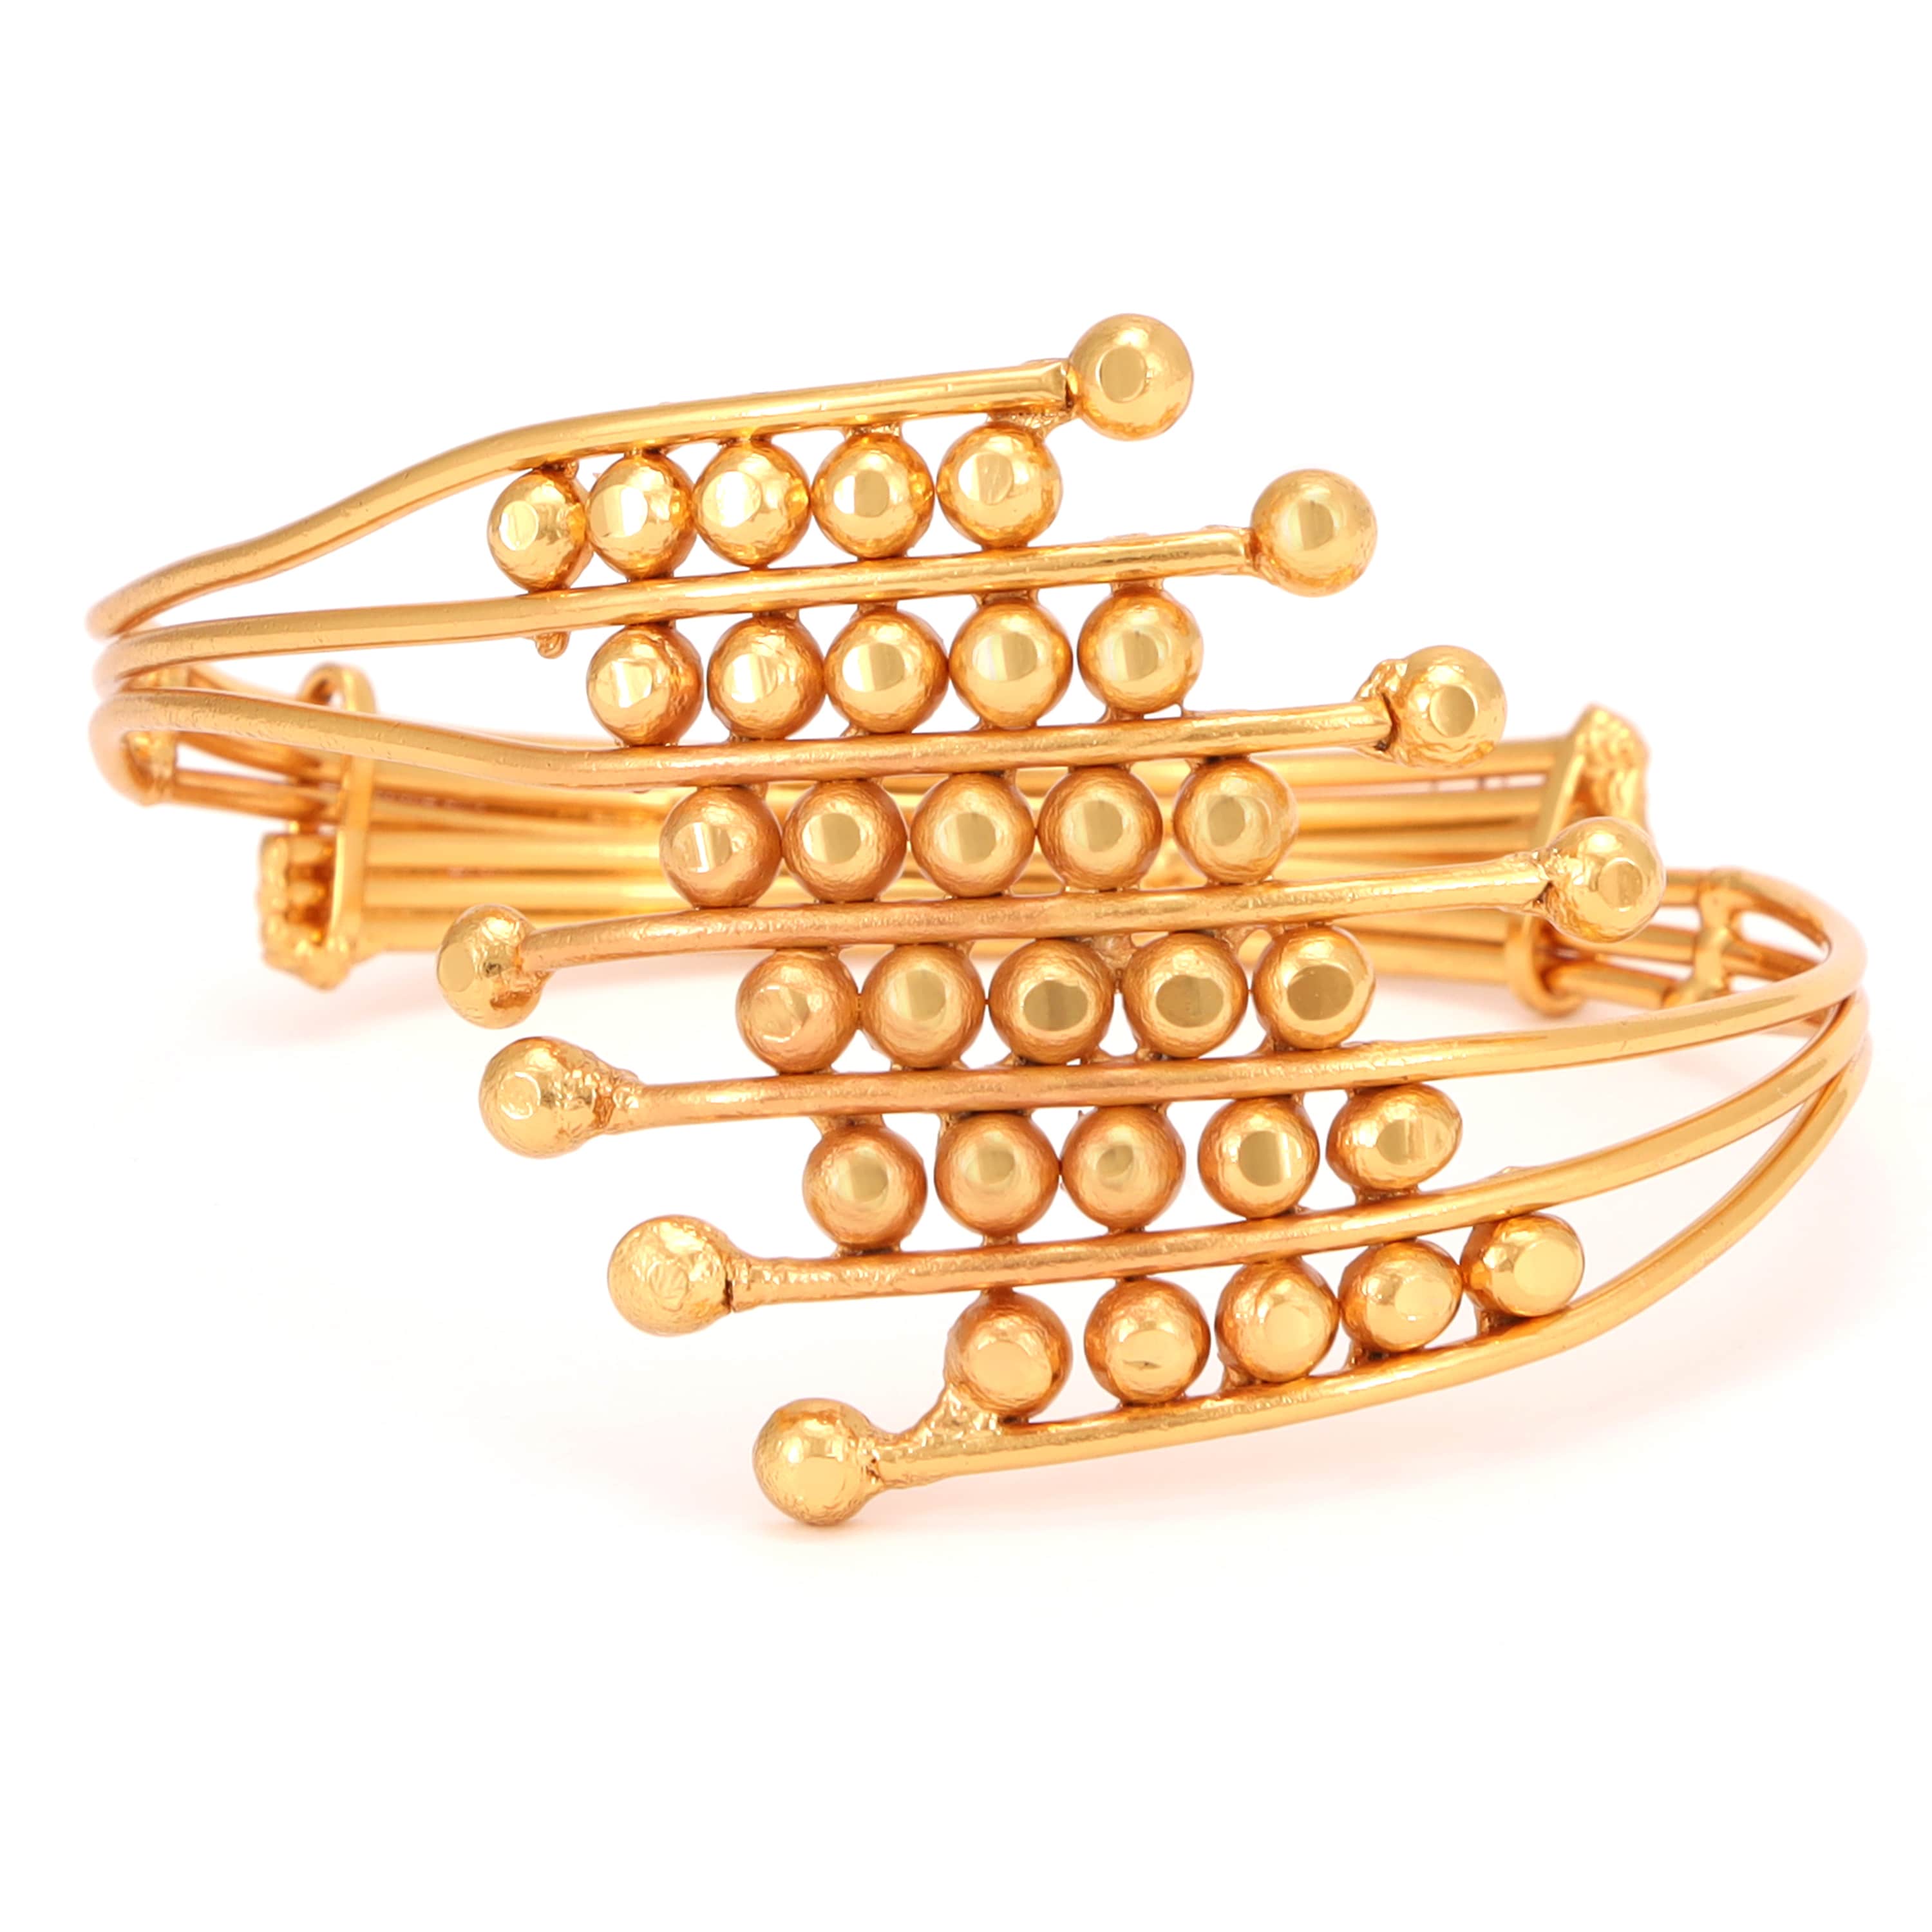 Subhas Brothers Jewellers - Look at this bracelet noa. Truly modern to fit  today's women and their lifestyle. This design will suit ur traditional as  well as modern attire perfectly. Weight 8.400gms